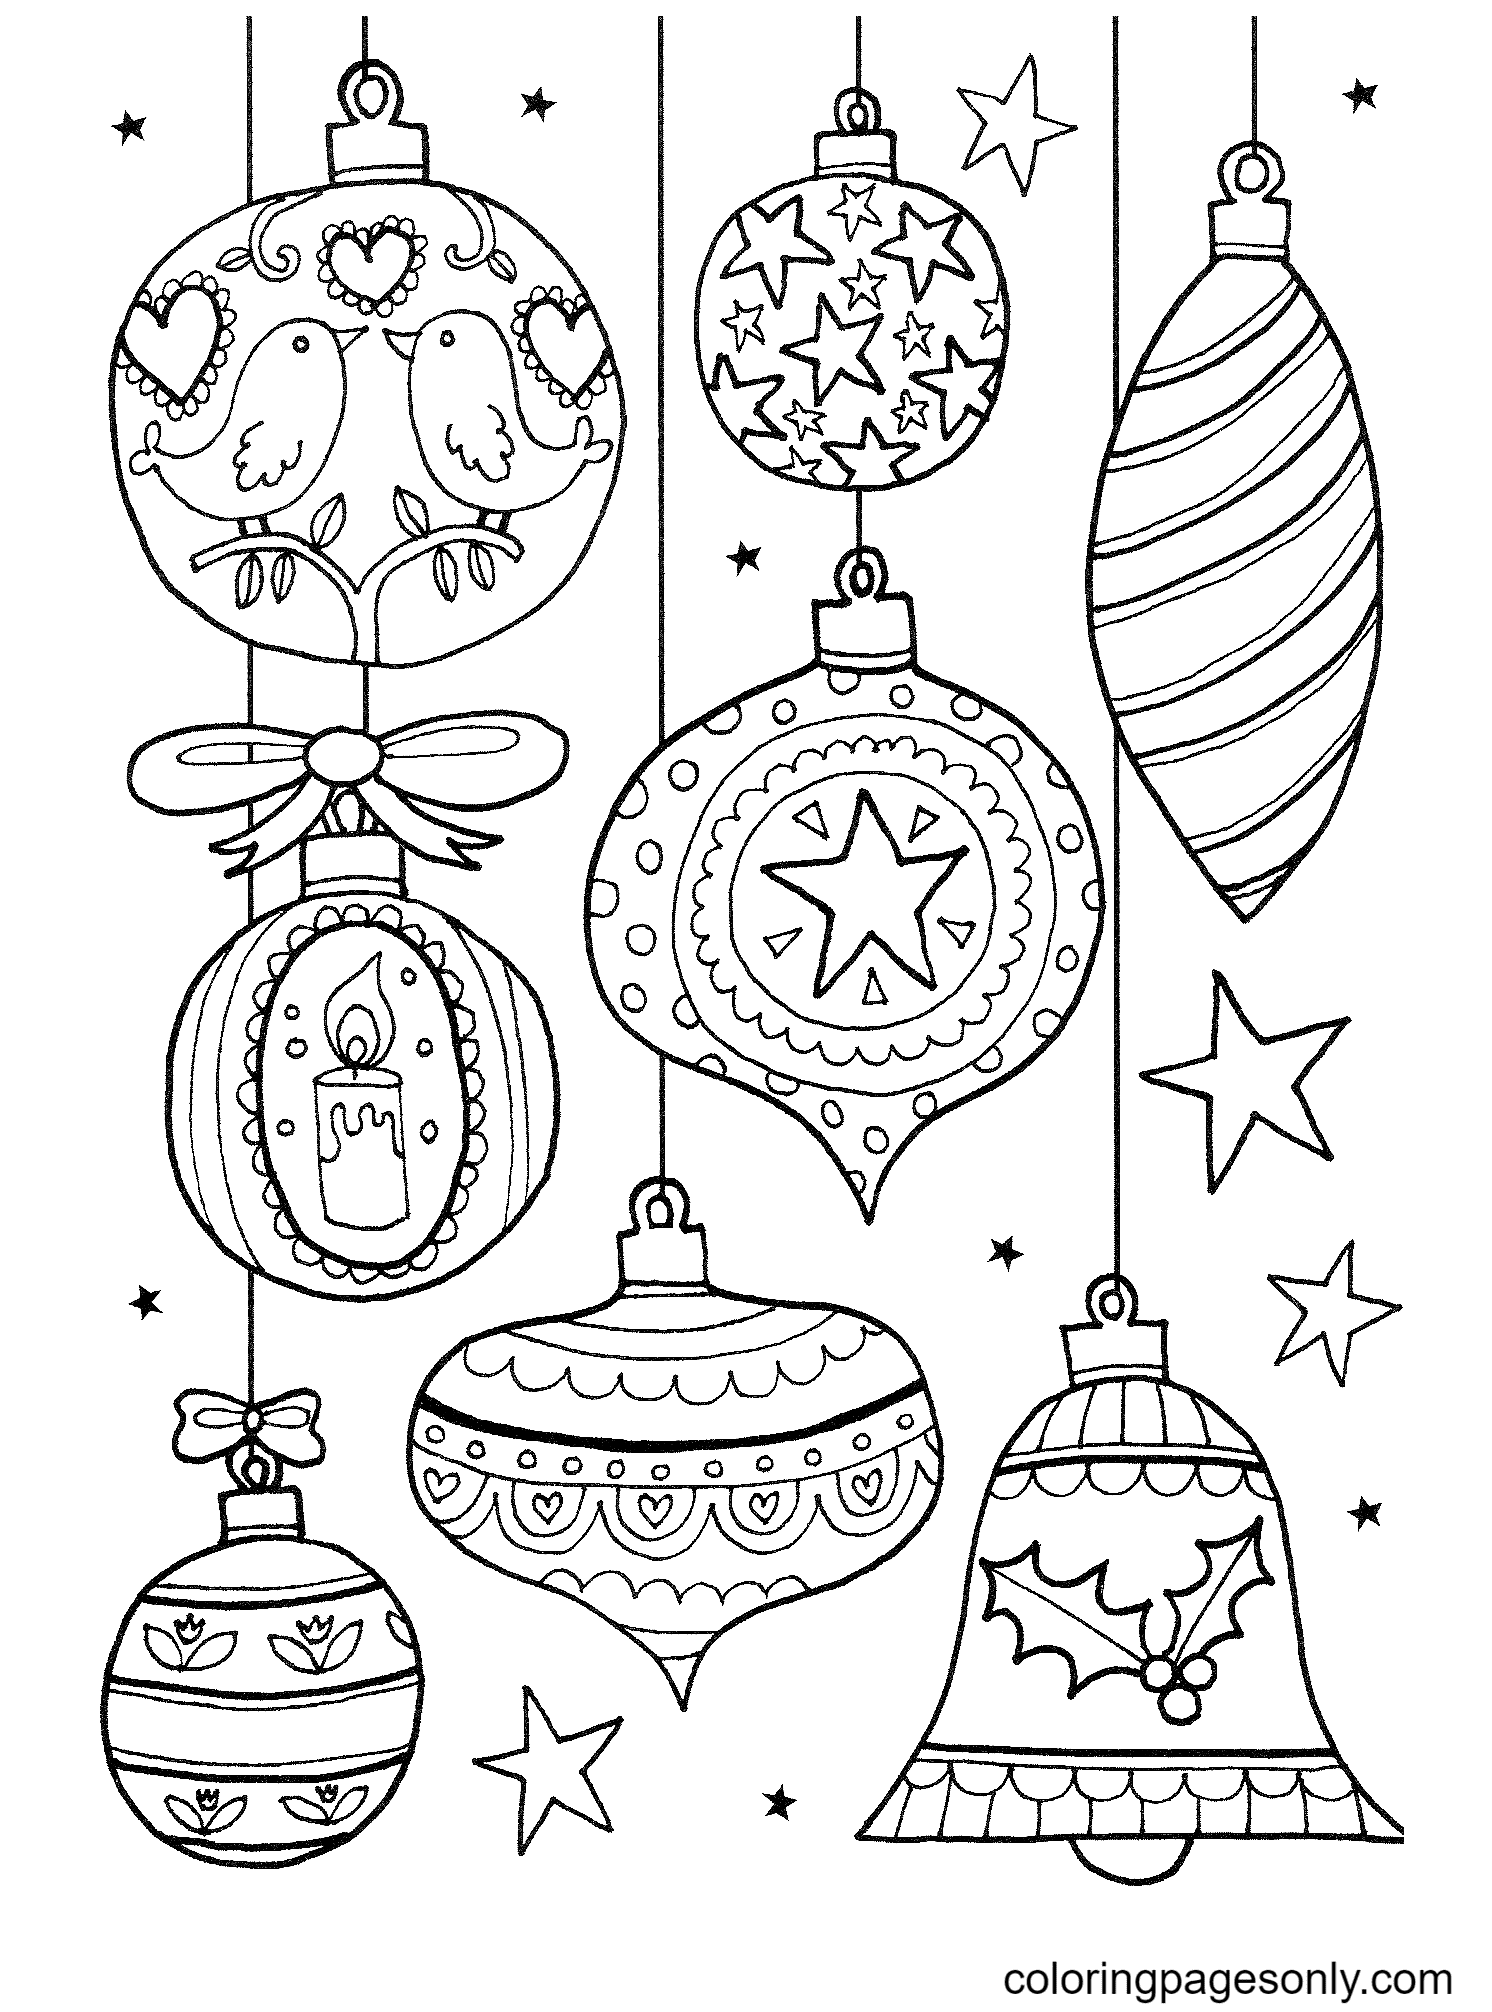 Christmas Decorations Free Printable Coloring Pages - Christmas